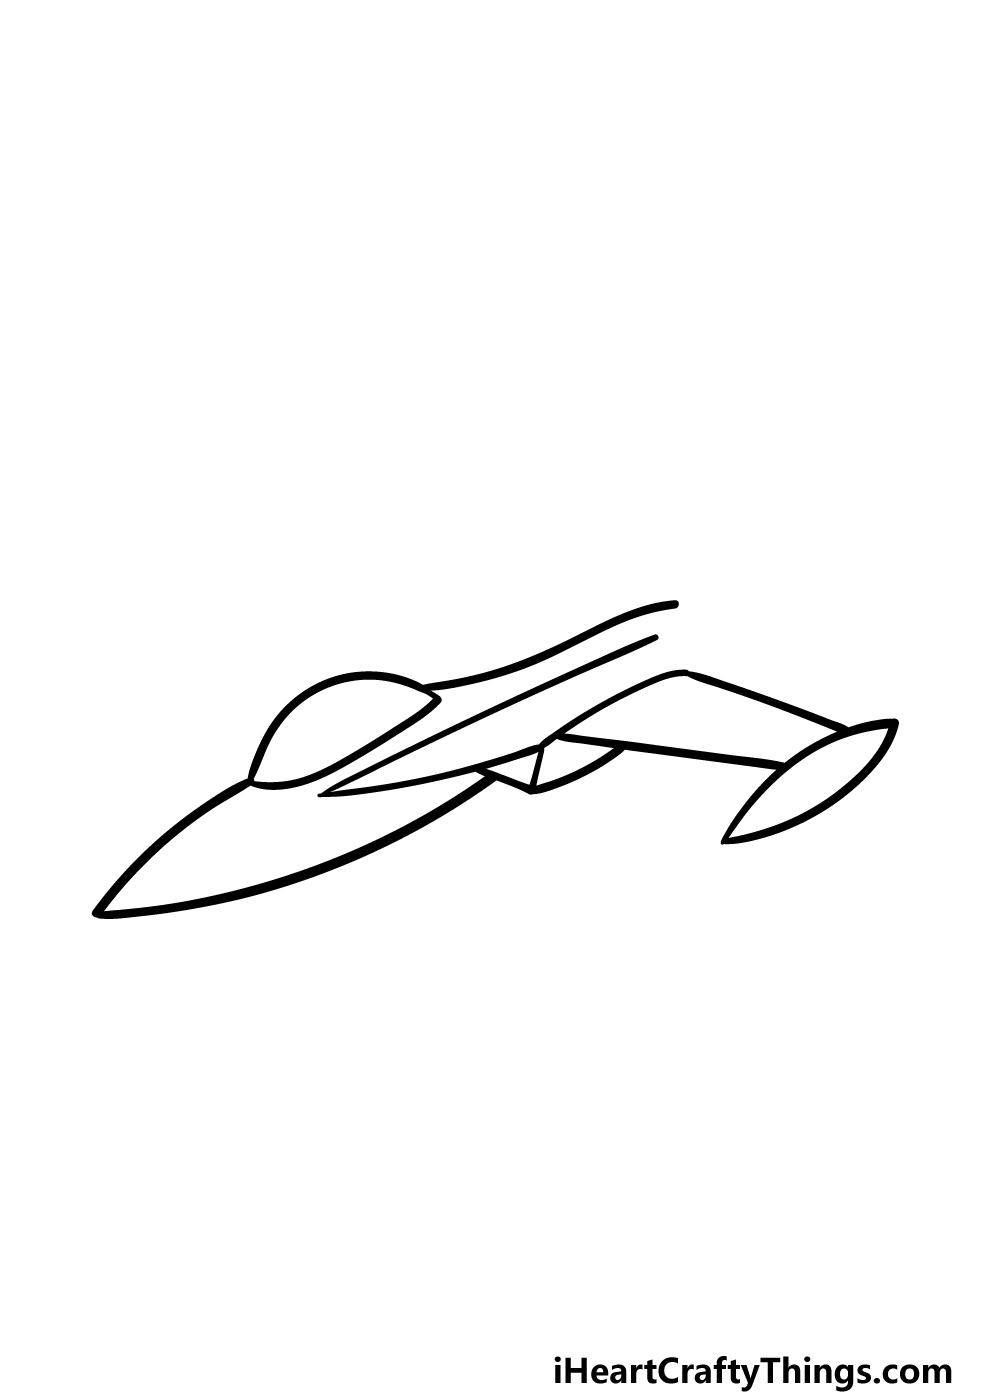 how to draw a Jet step 2